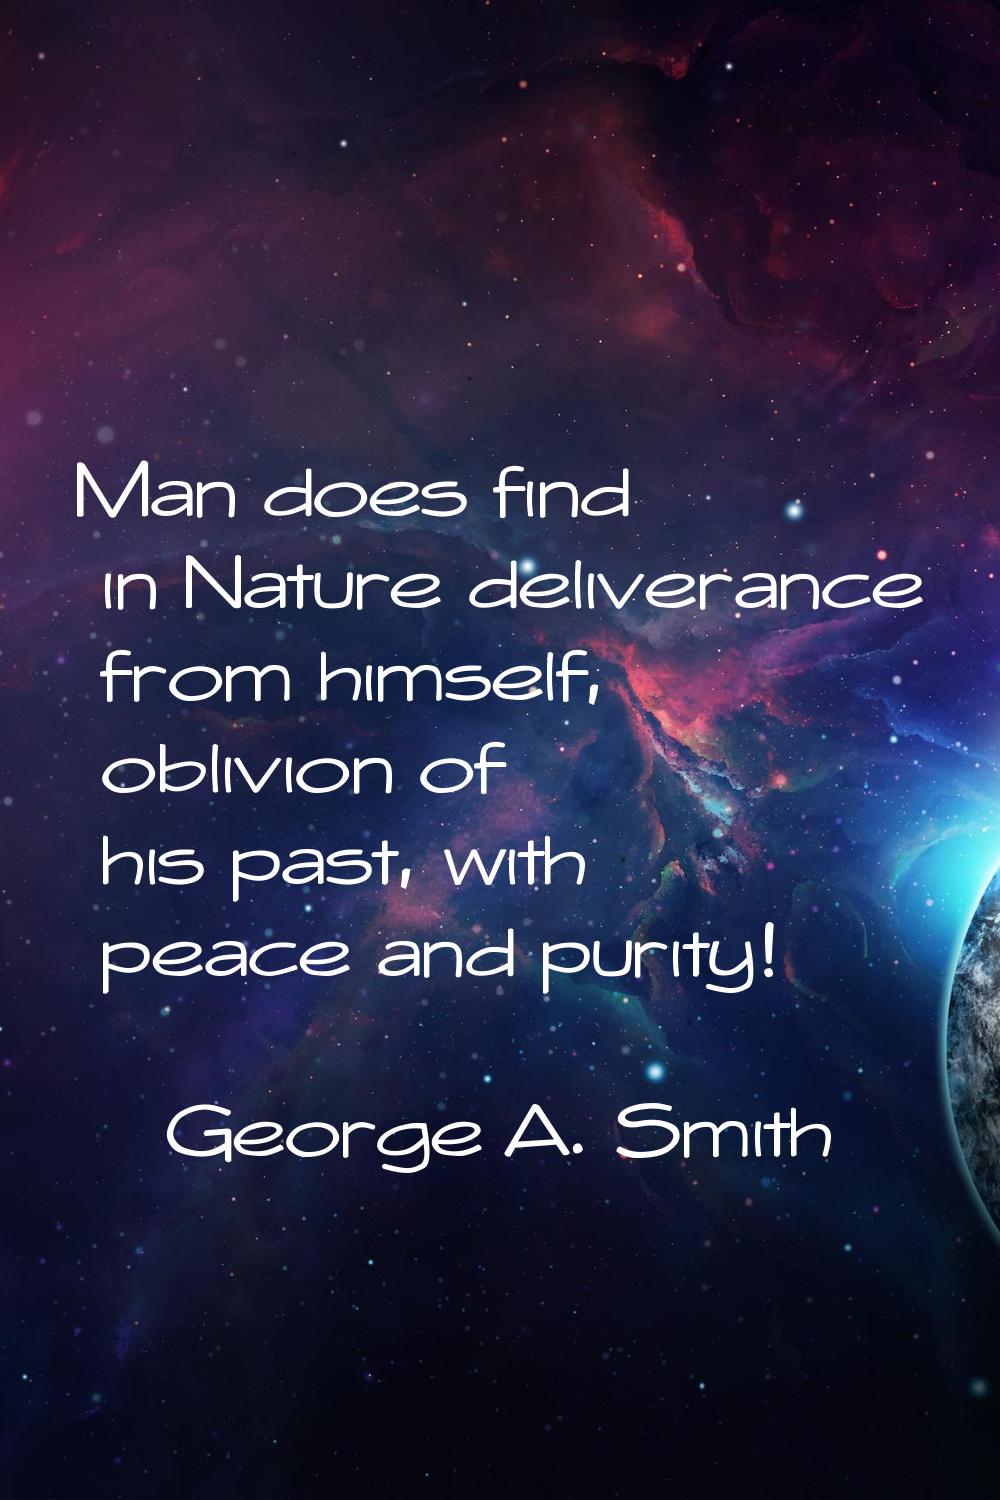 Man does find in Nature deliverance from himself, oblivion of his past, with peace and purity!